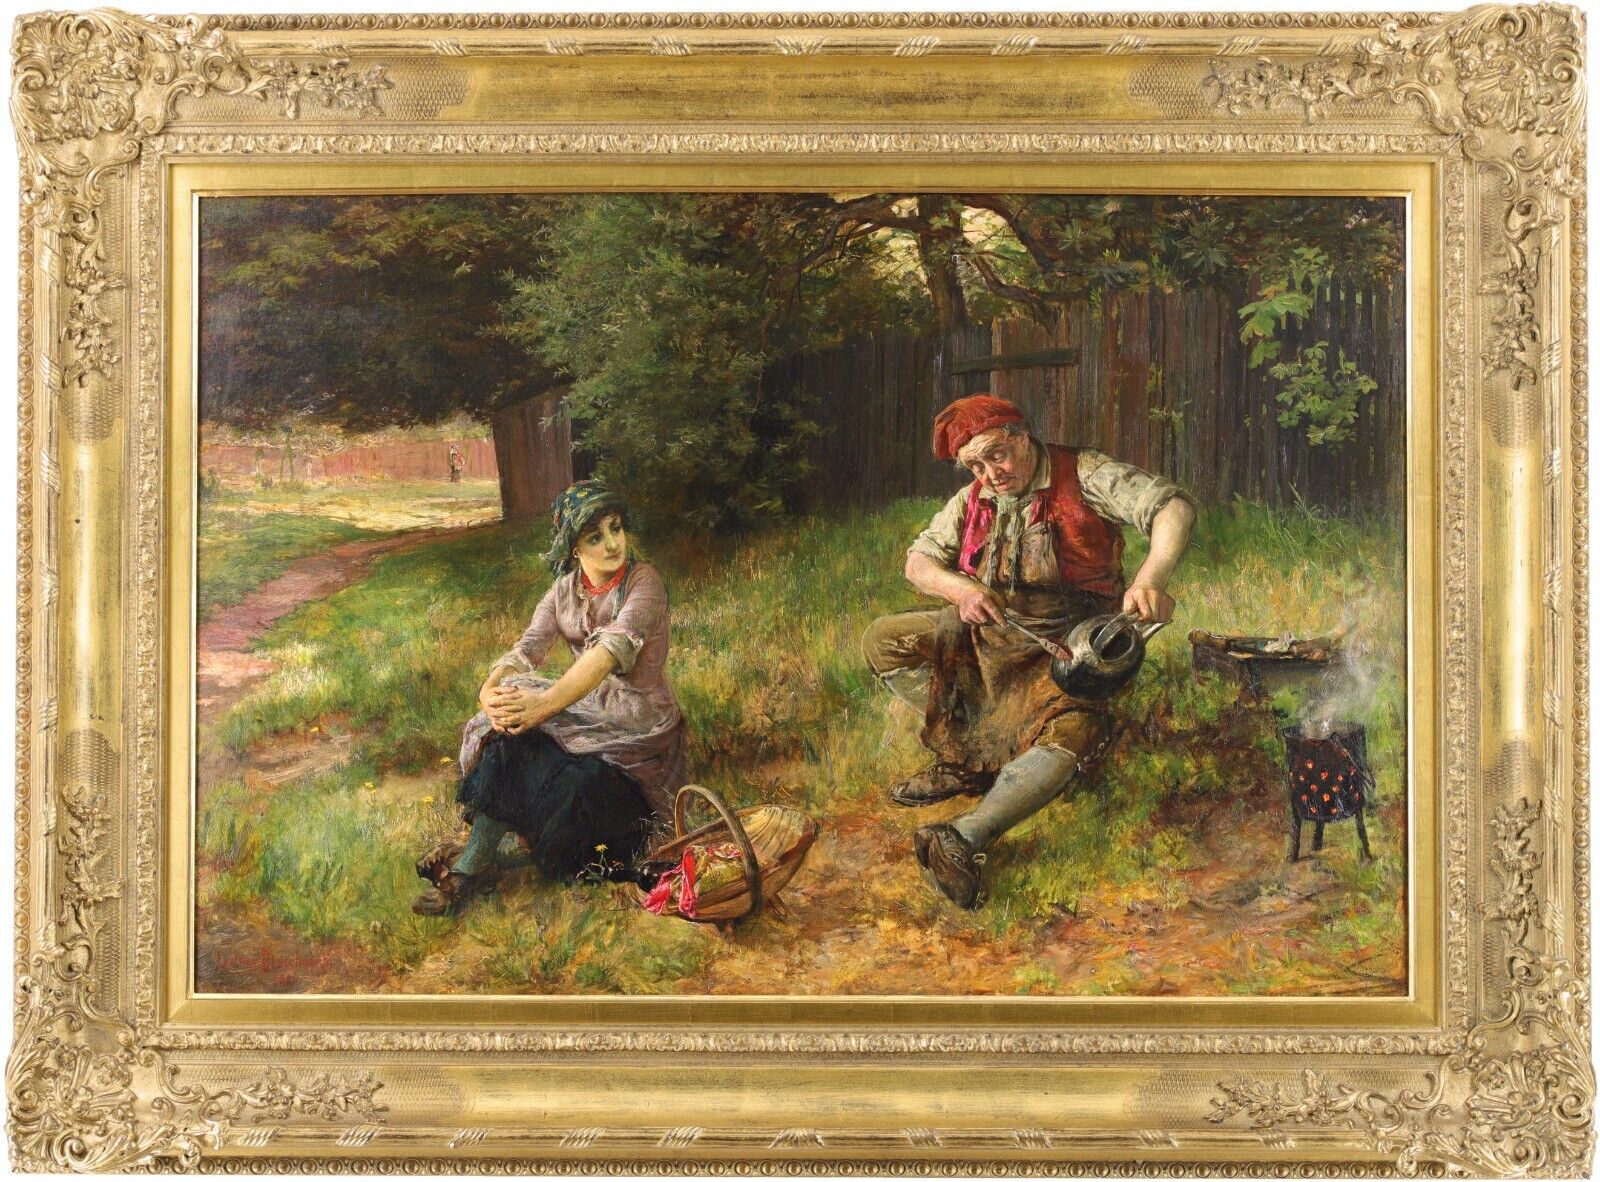 The Tinker Antique Oil Painting by Francis Sydney Muschamp (1851-1929)